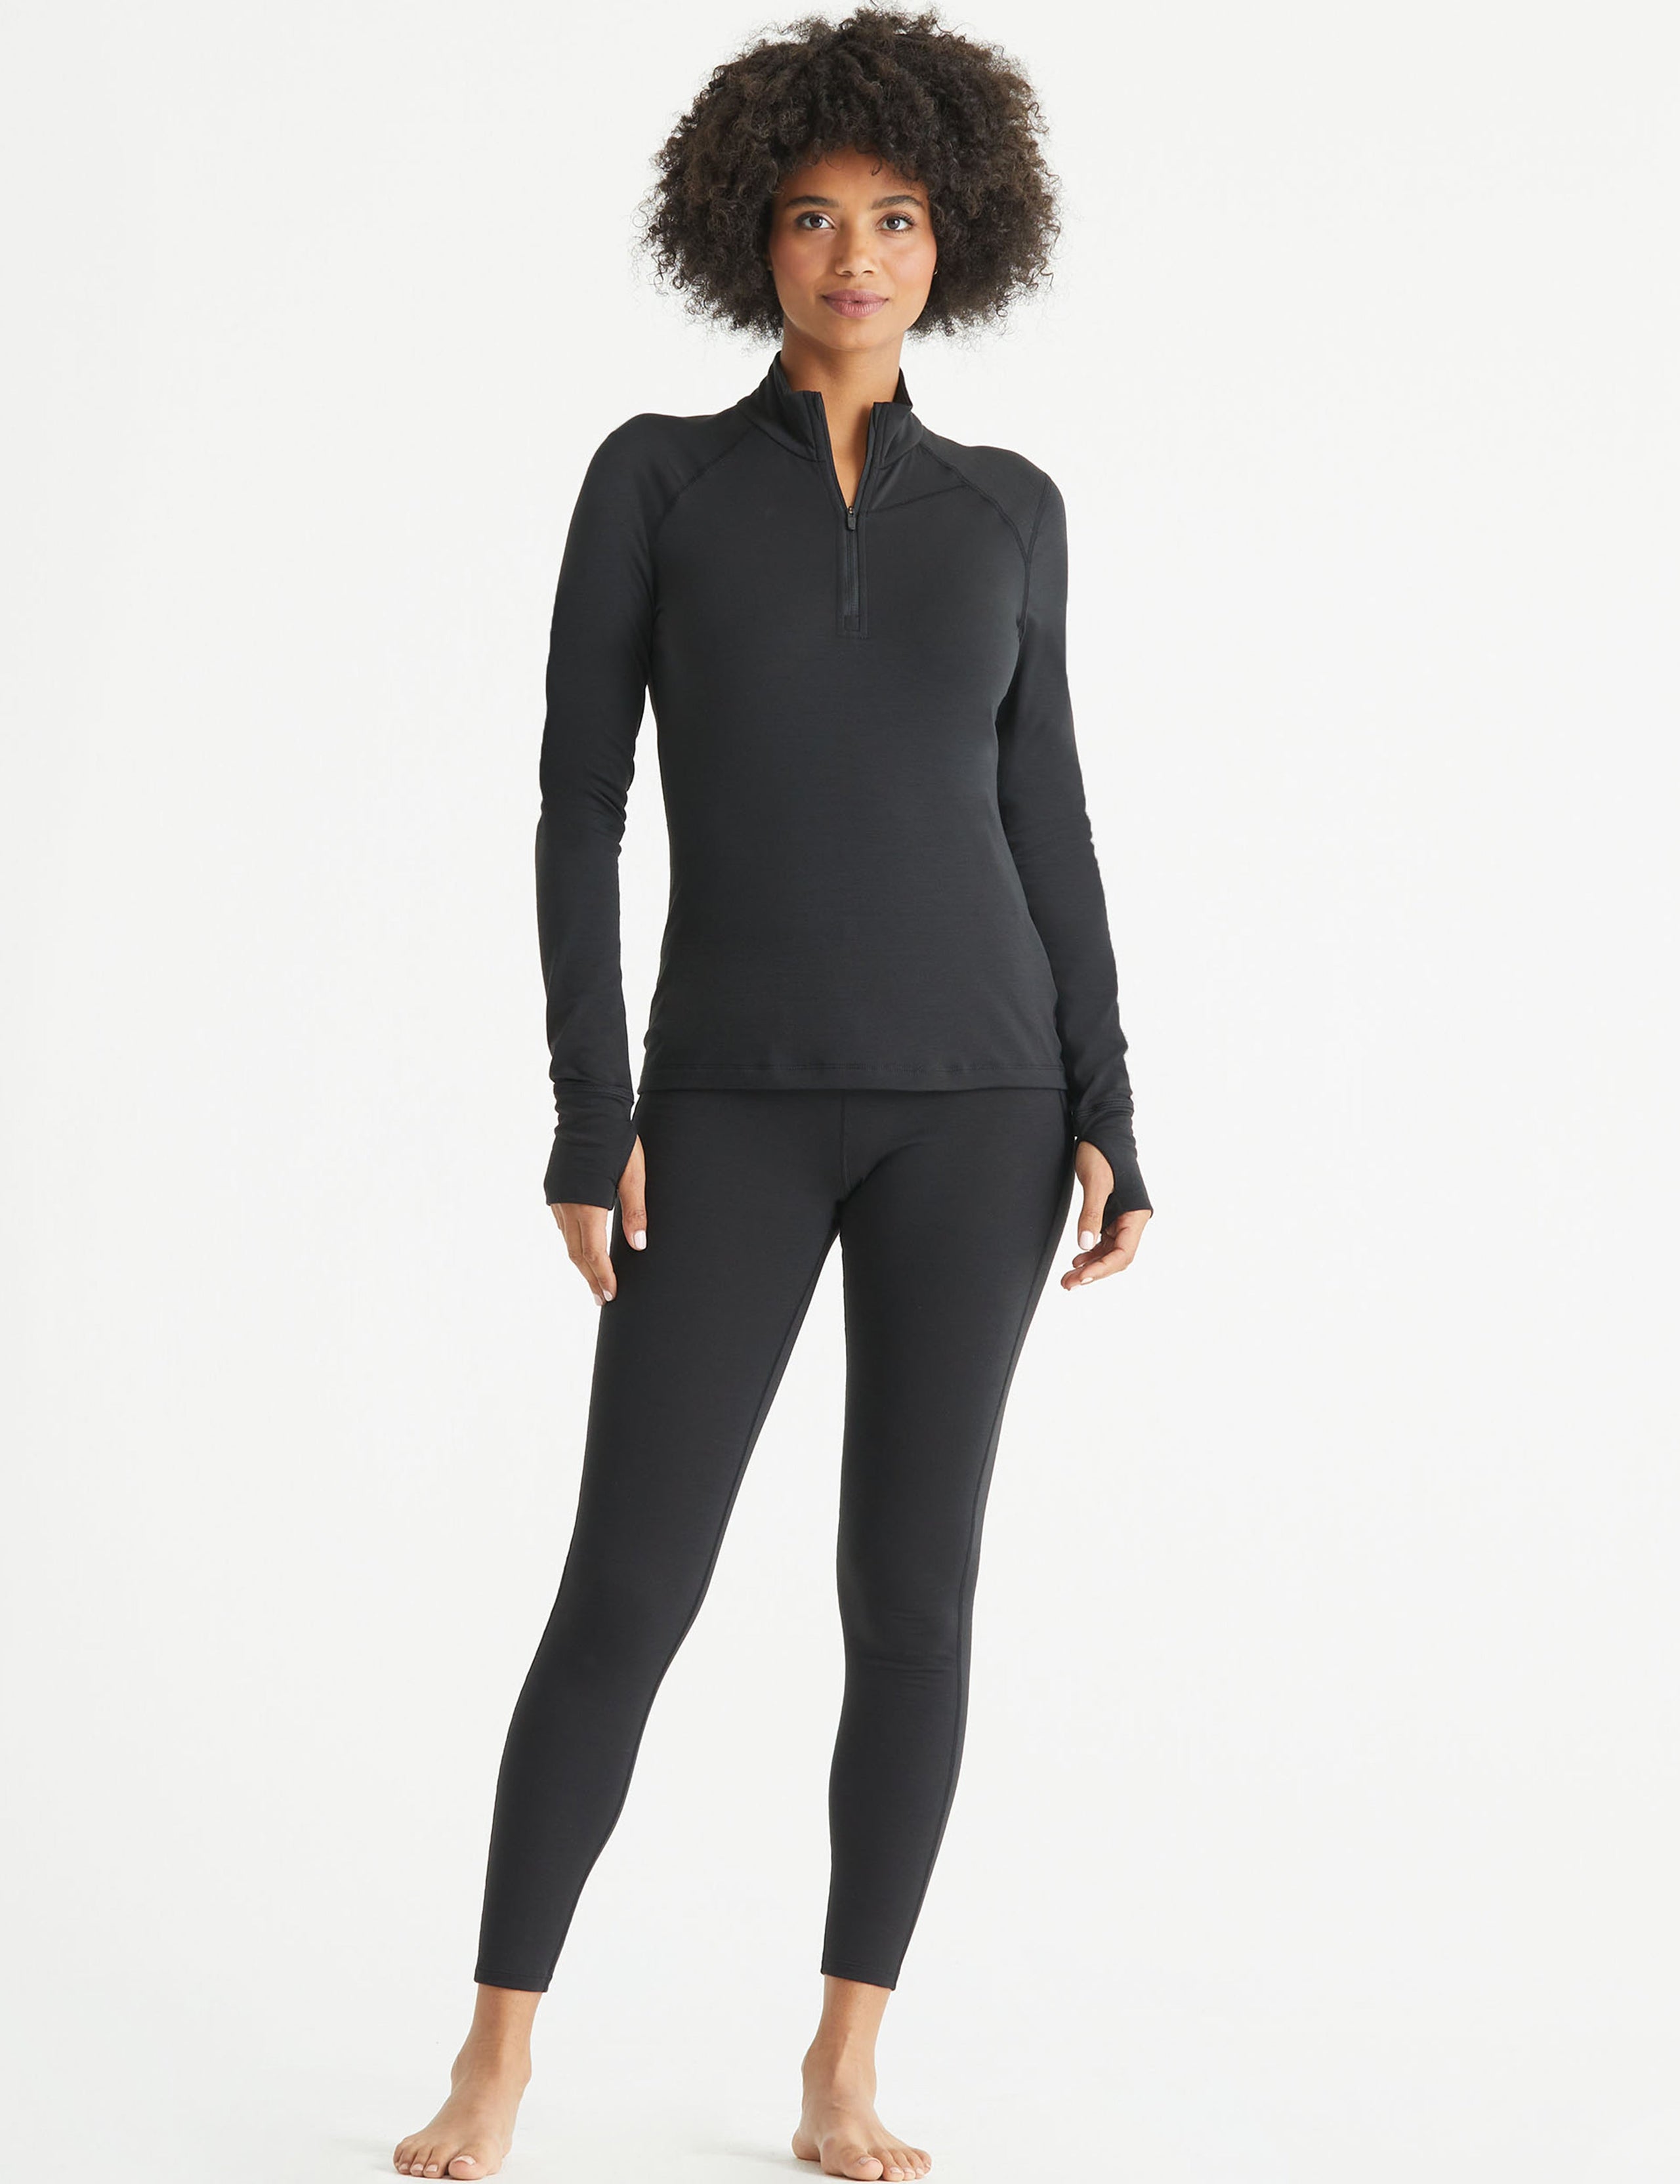 base layer jacket for women from Aether Apparel